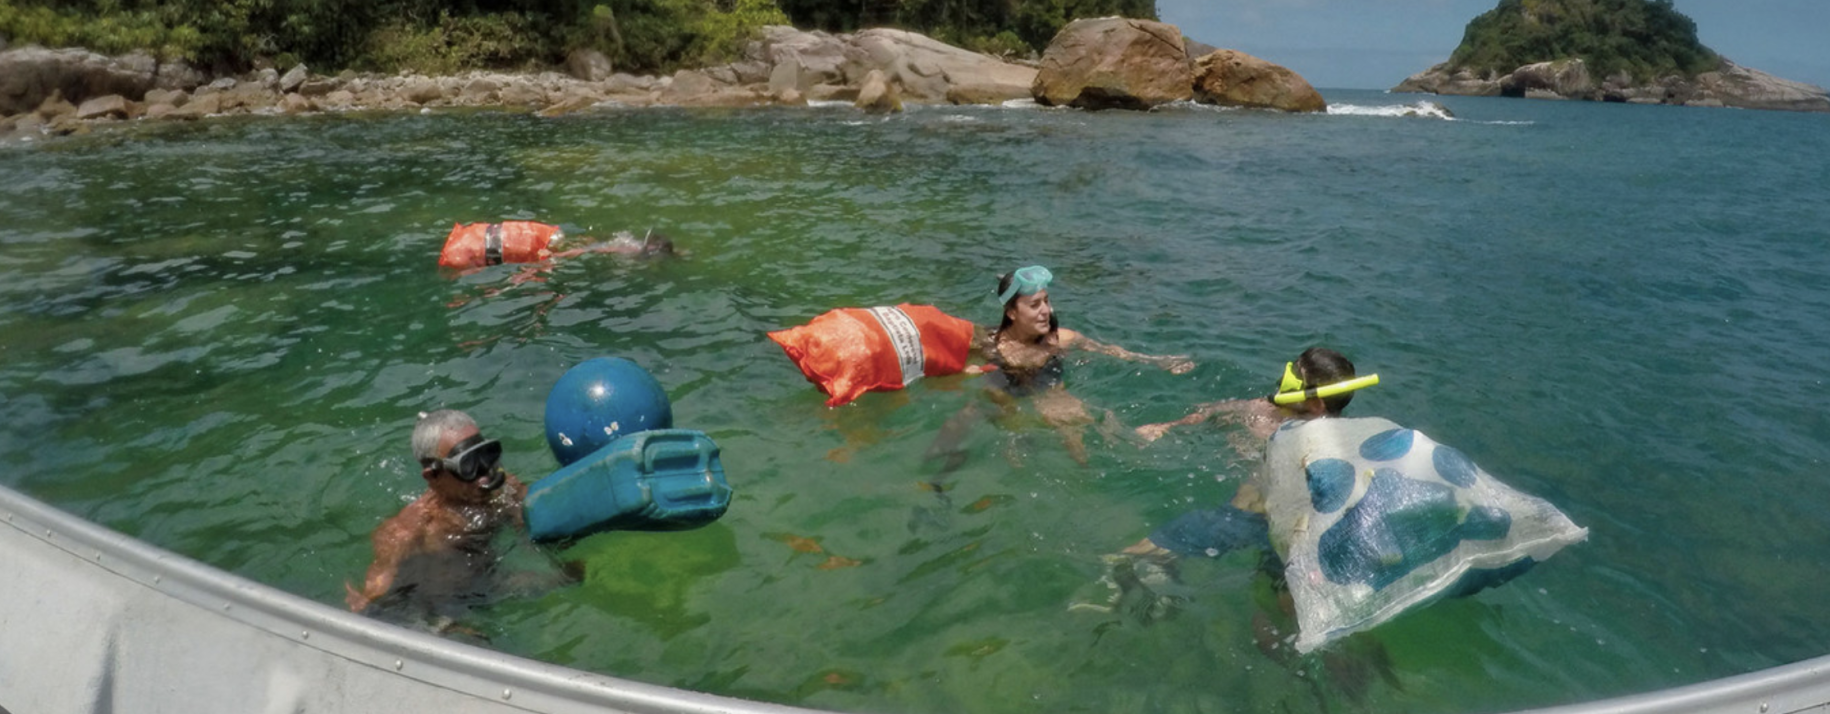 Several people swim in the ocean with large bags for waste collection and a floating plastic buoy.